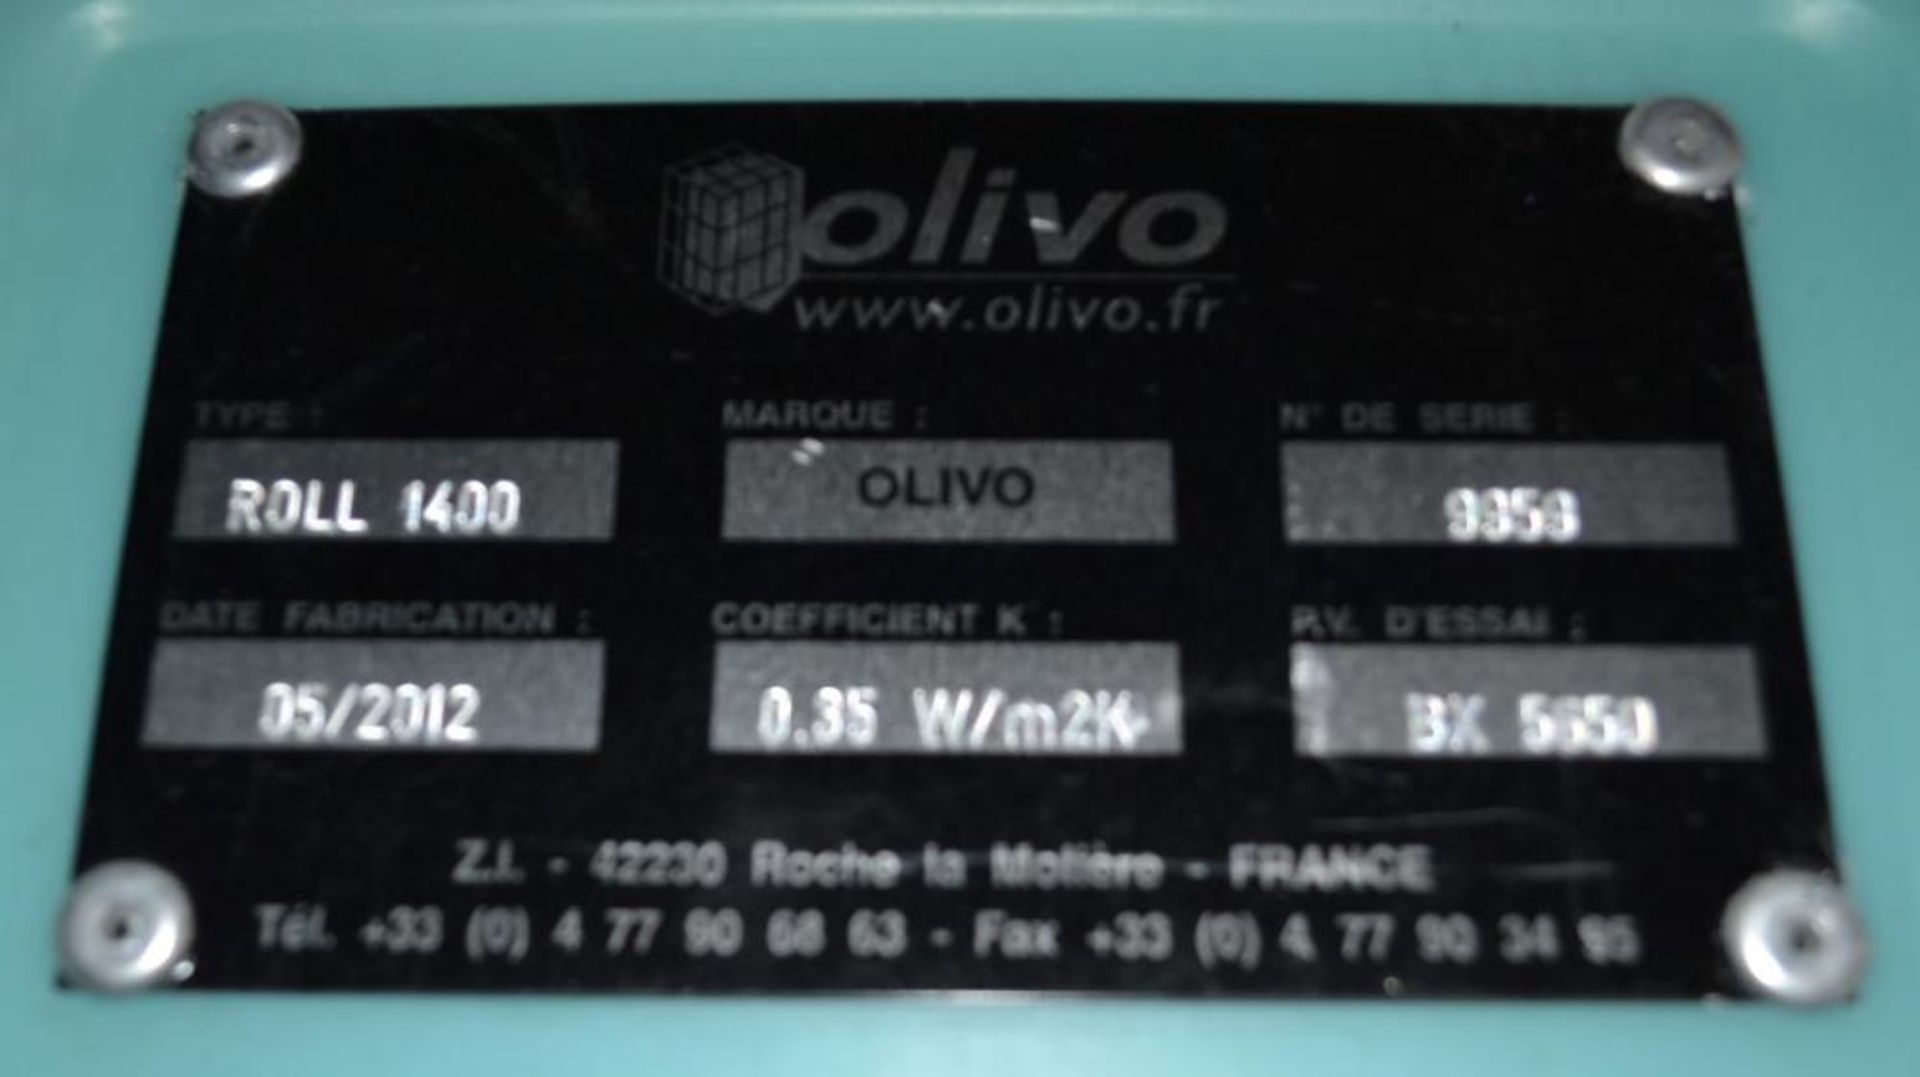 1 x Olivo Roll 1400 Thermo Container - 197x98x117cm - Ref: DRT0OLIVO - CL185 - Location: Stoke-on- - Image 9 of 10